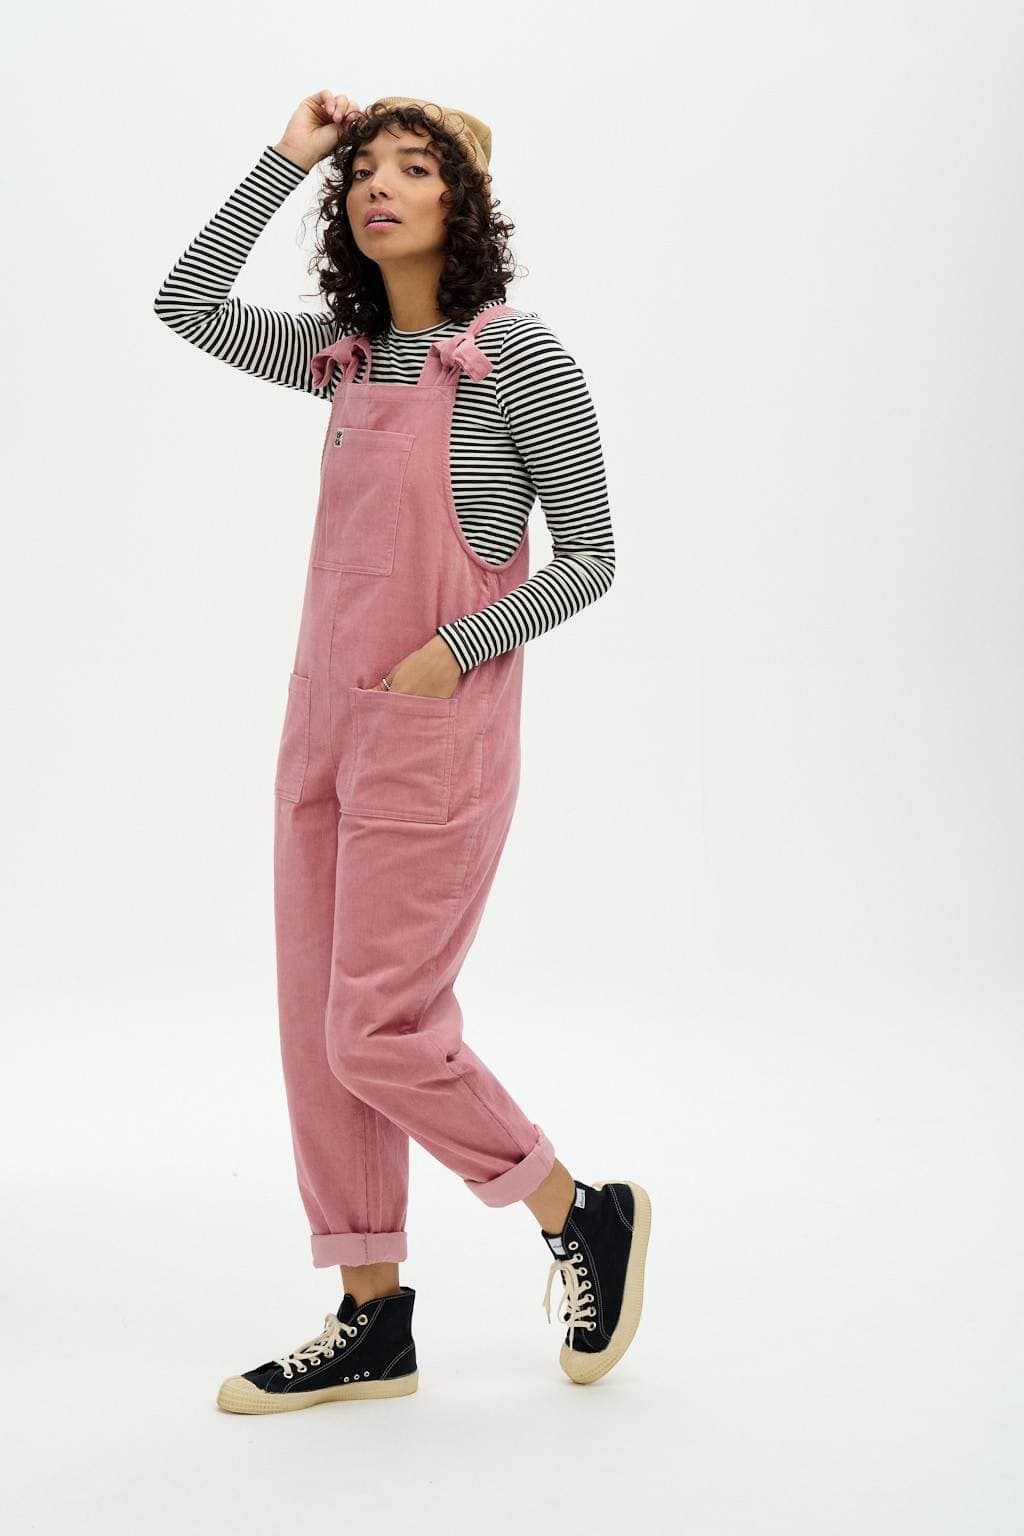 a model wearing the dusty pink corduroy overalls